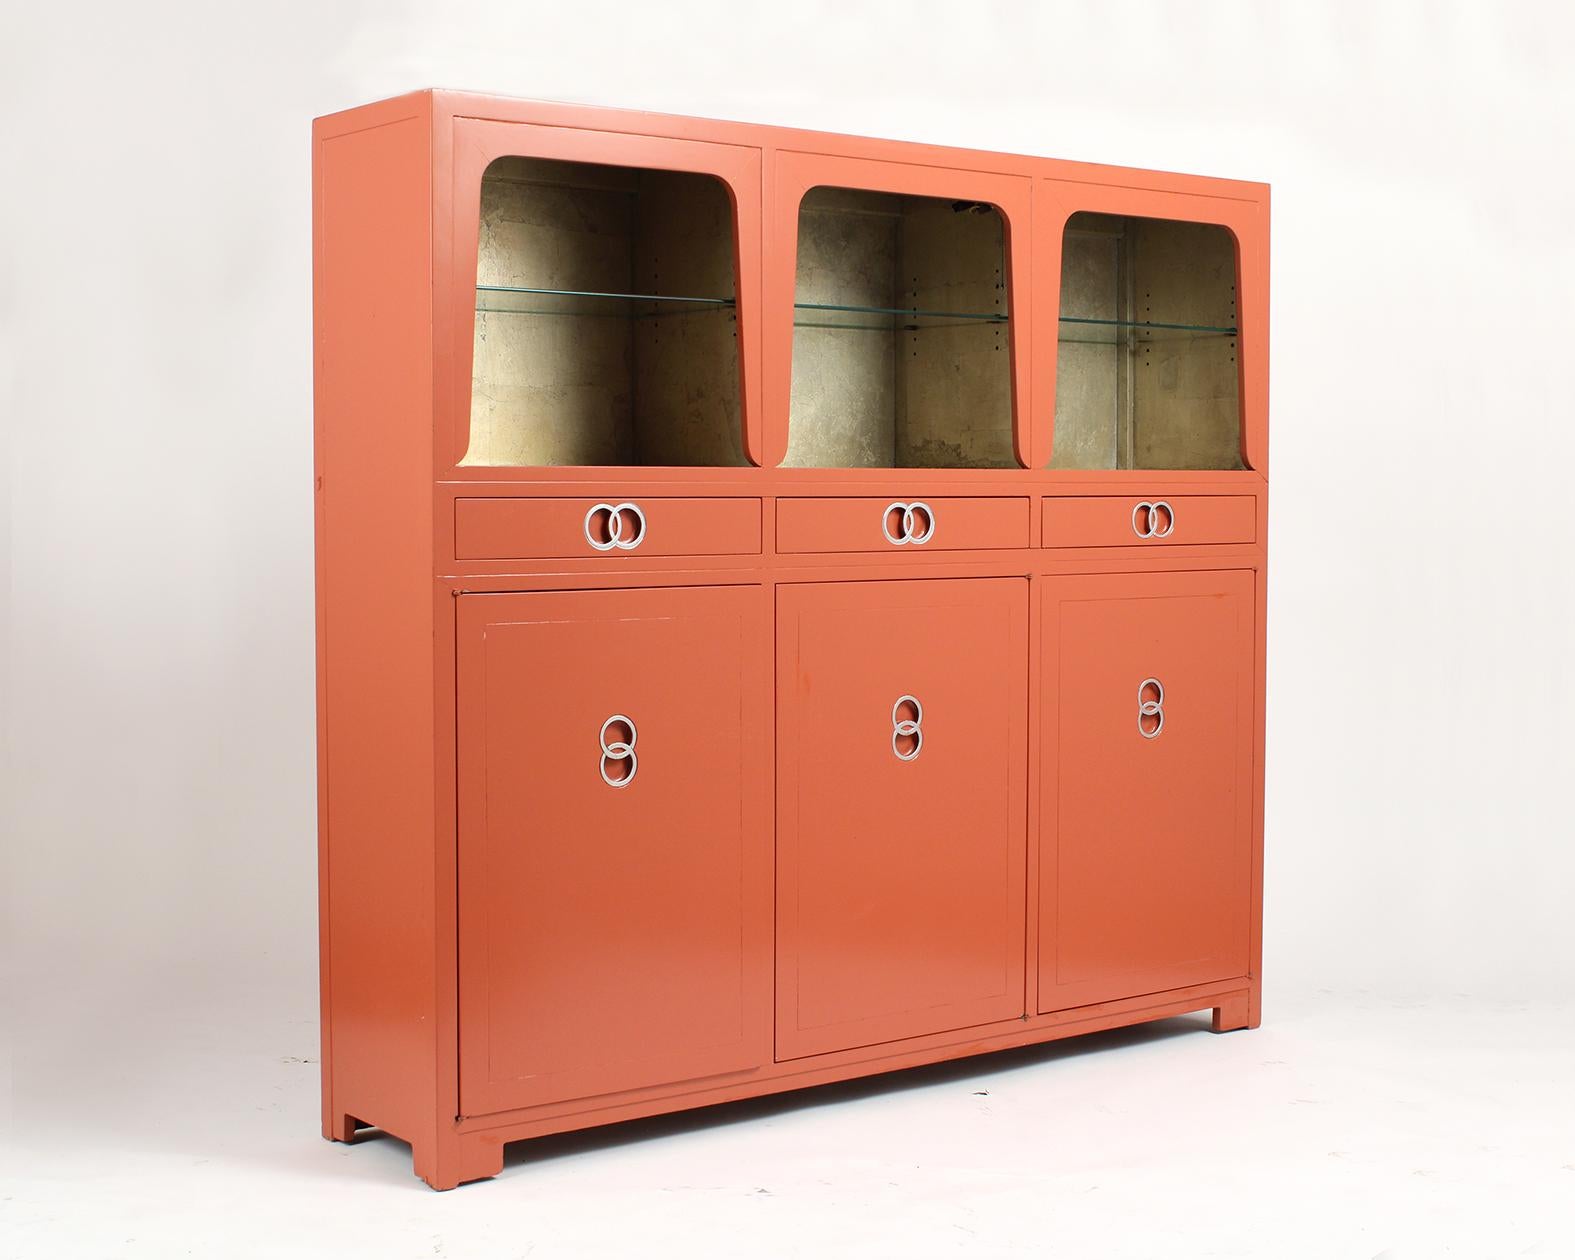 This Mid-Century Modern bookcase by Baker is in good condition and has its original orange painted finish. The top section has three spaces each with an adjustable glass shelf, and original gold painted interior. Below that there are three pull out